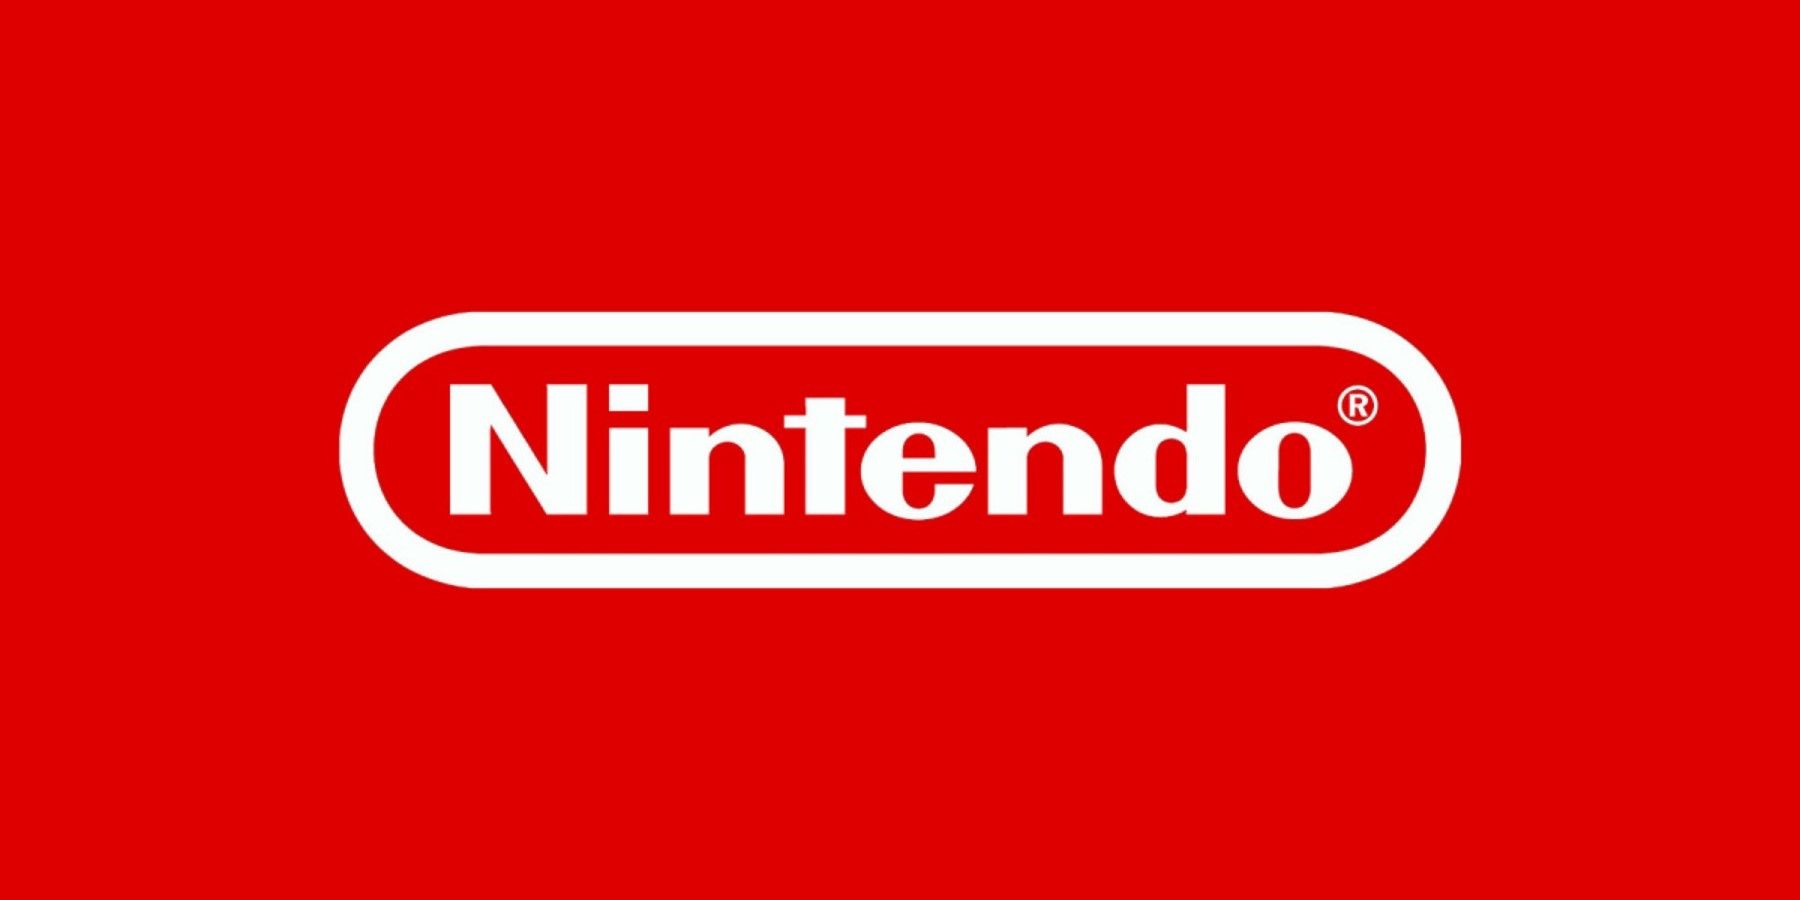 The Nintendo logo in white on a red background